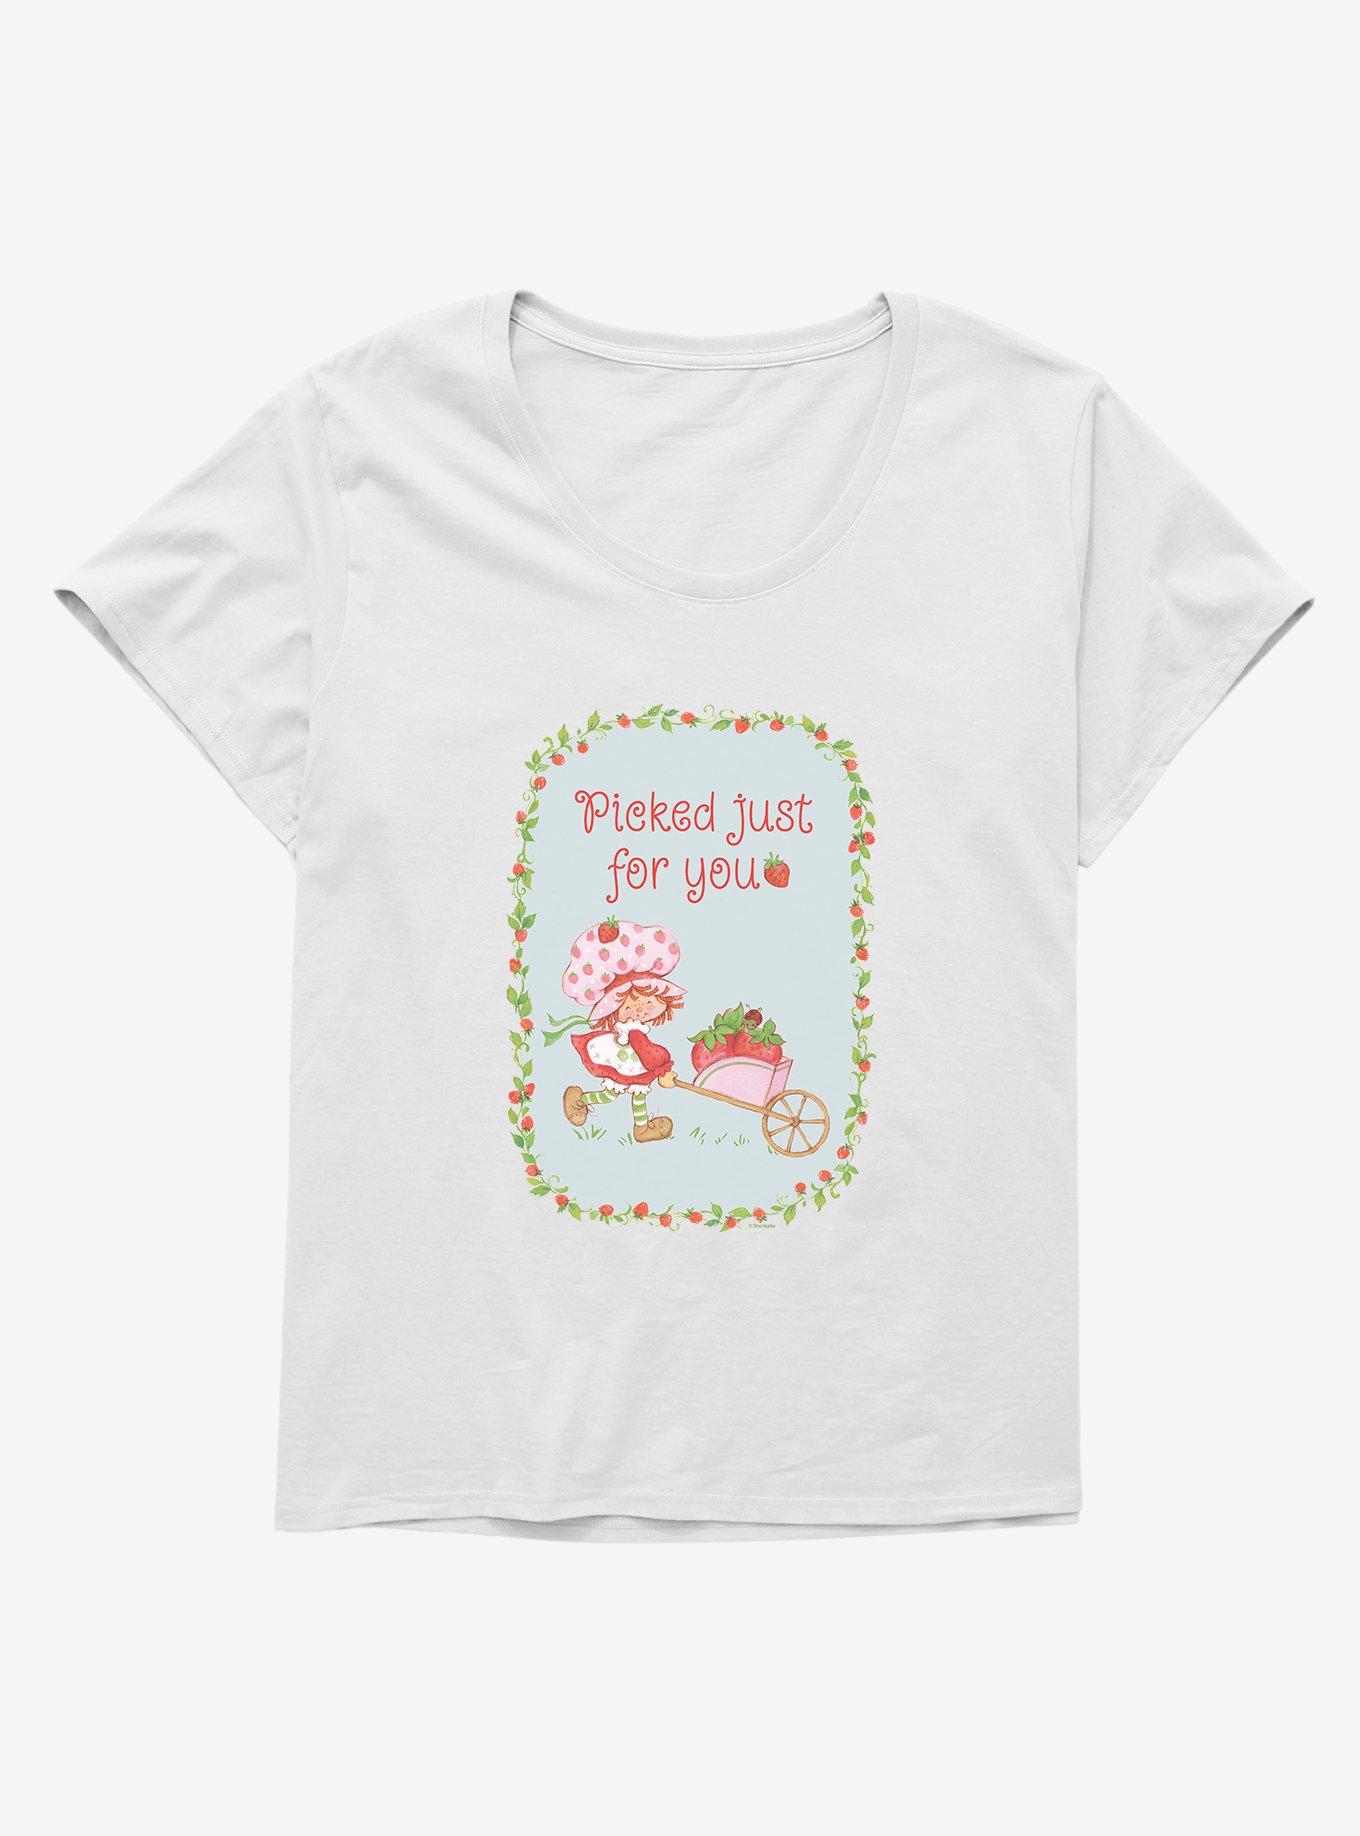 Strawberry Shortcake Picked Just For You Womens T-Shirt Plus Size, WHITE, hi-res